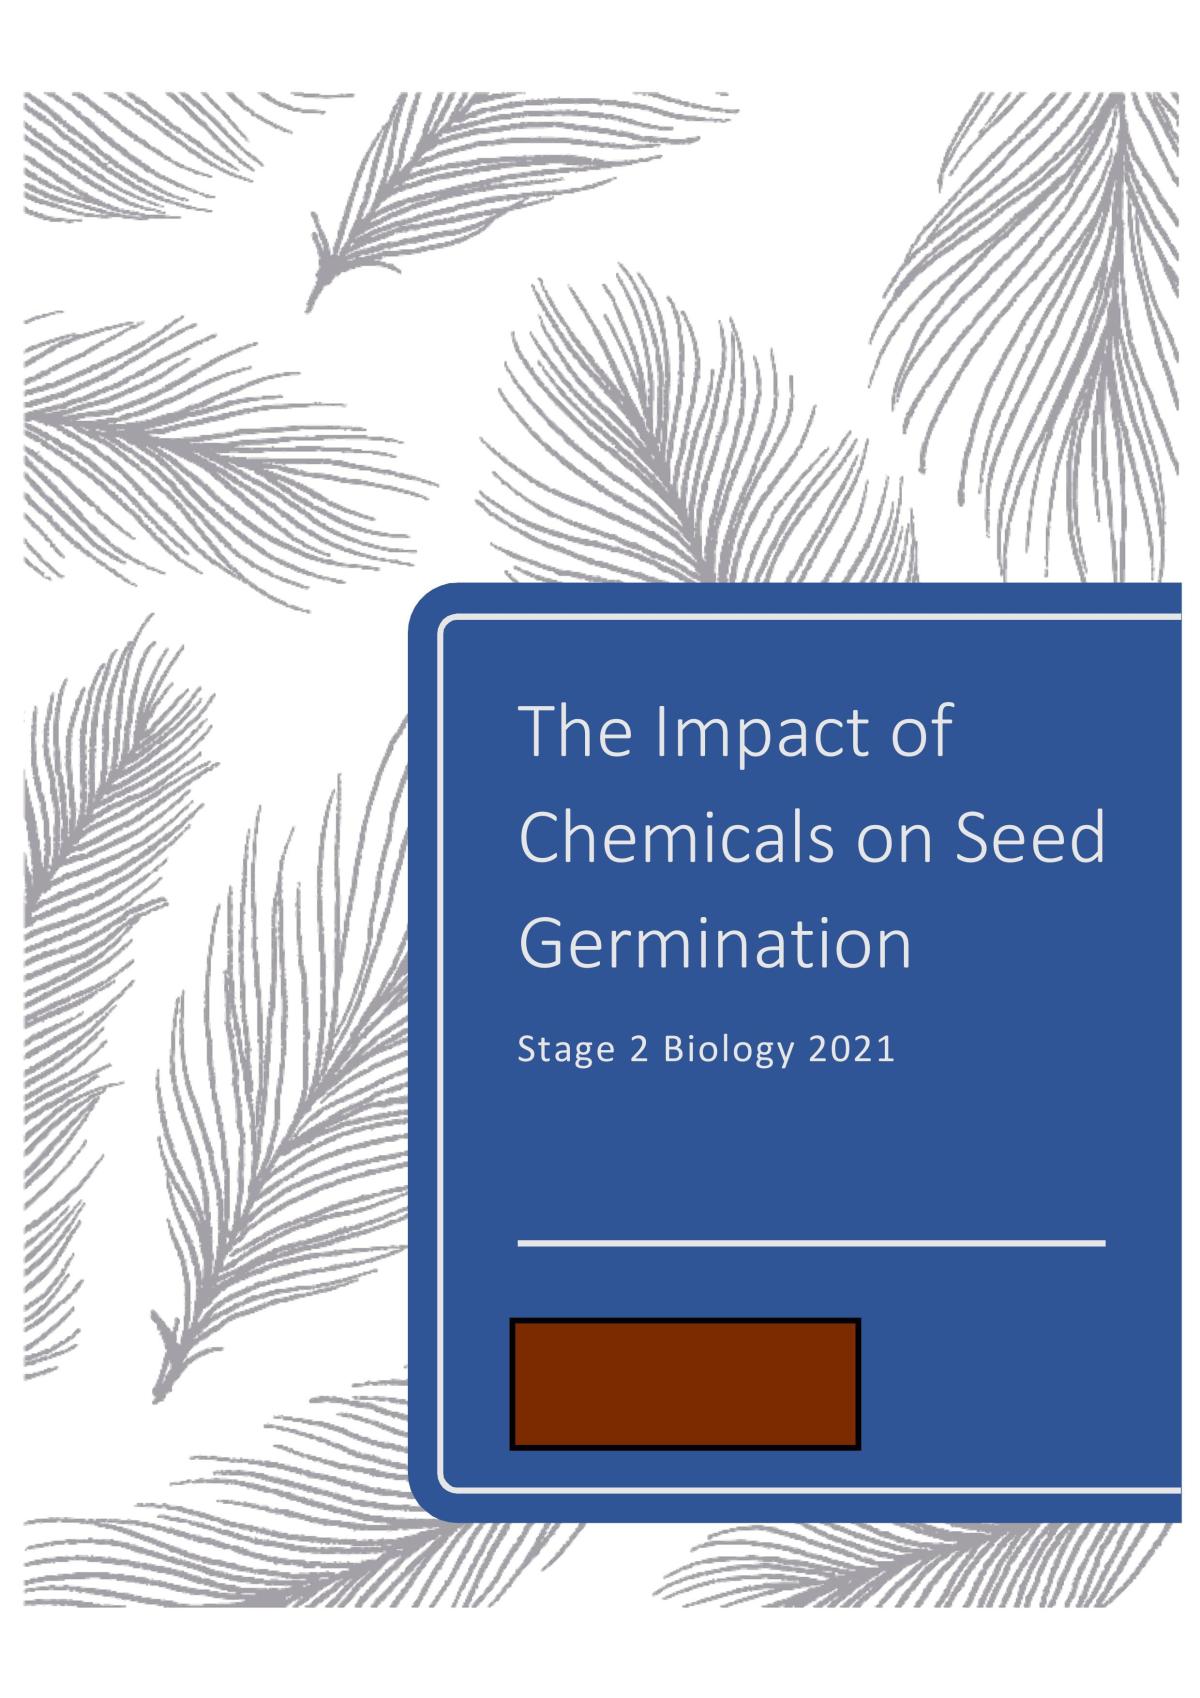 Stage 2 biology practical report on the impact of chemicals on seed germination - Page 1